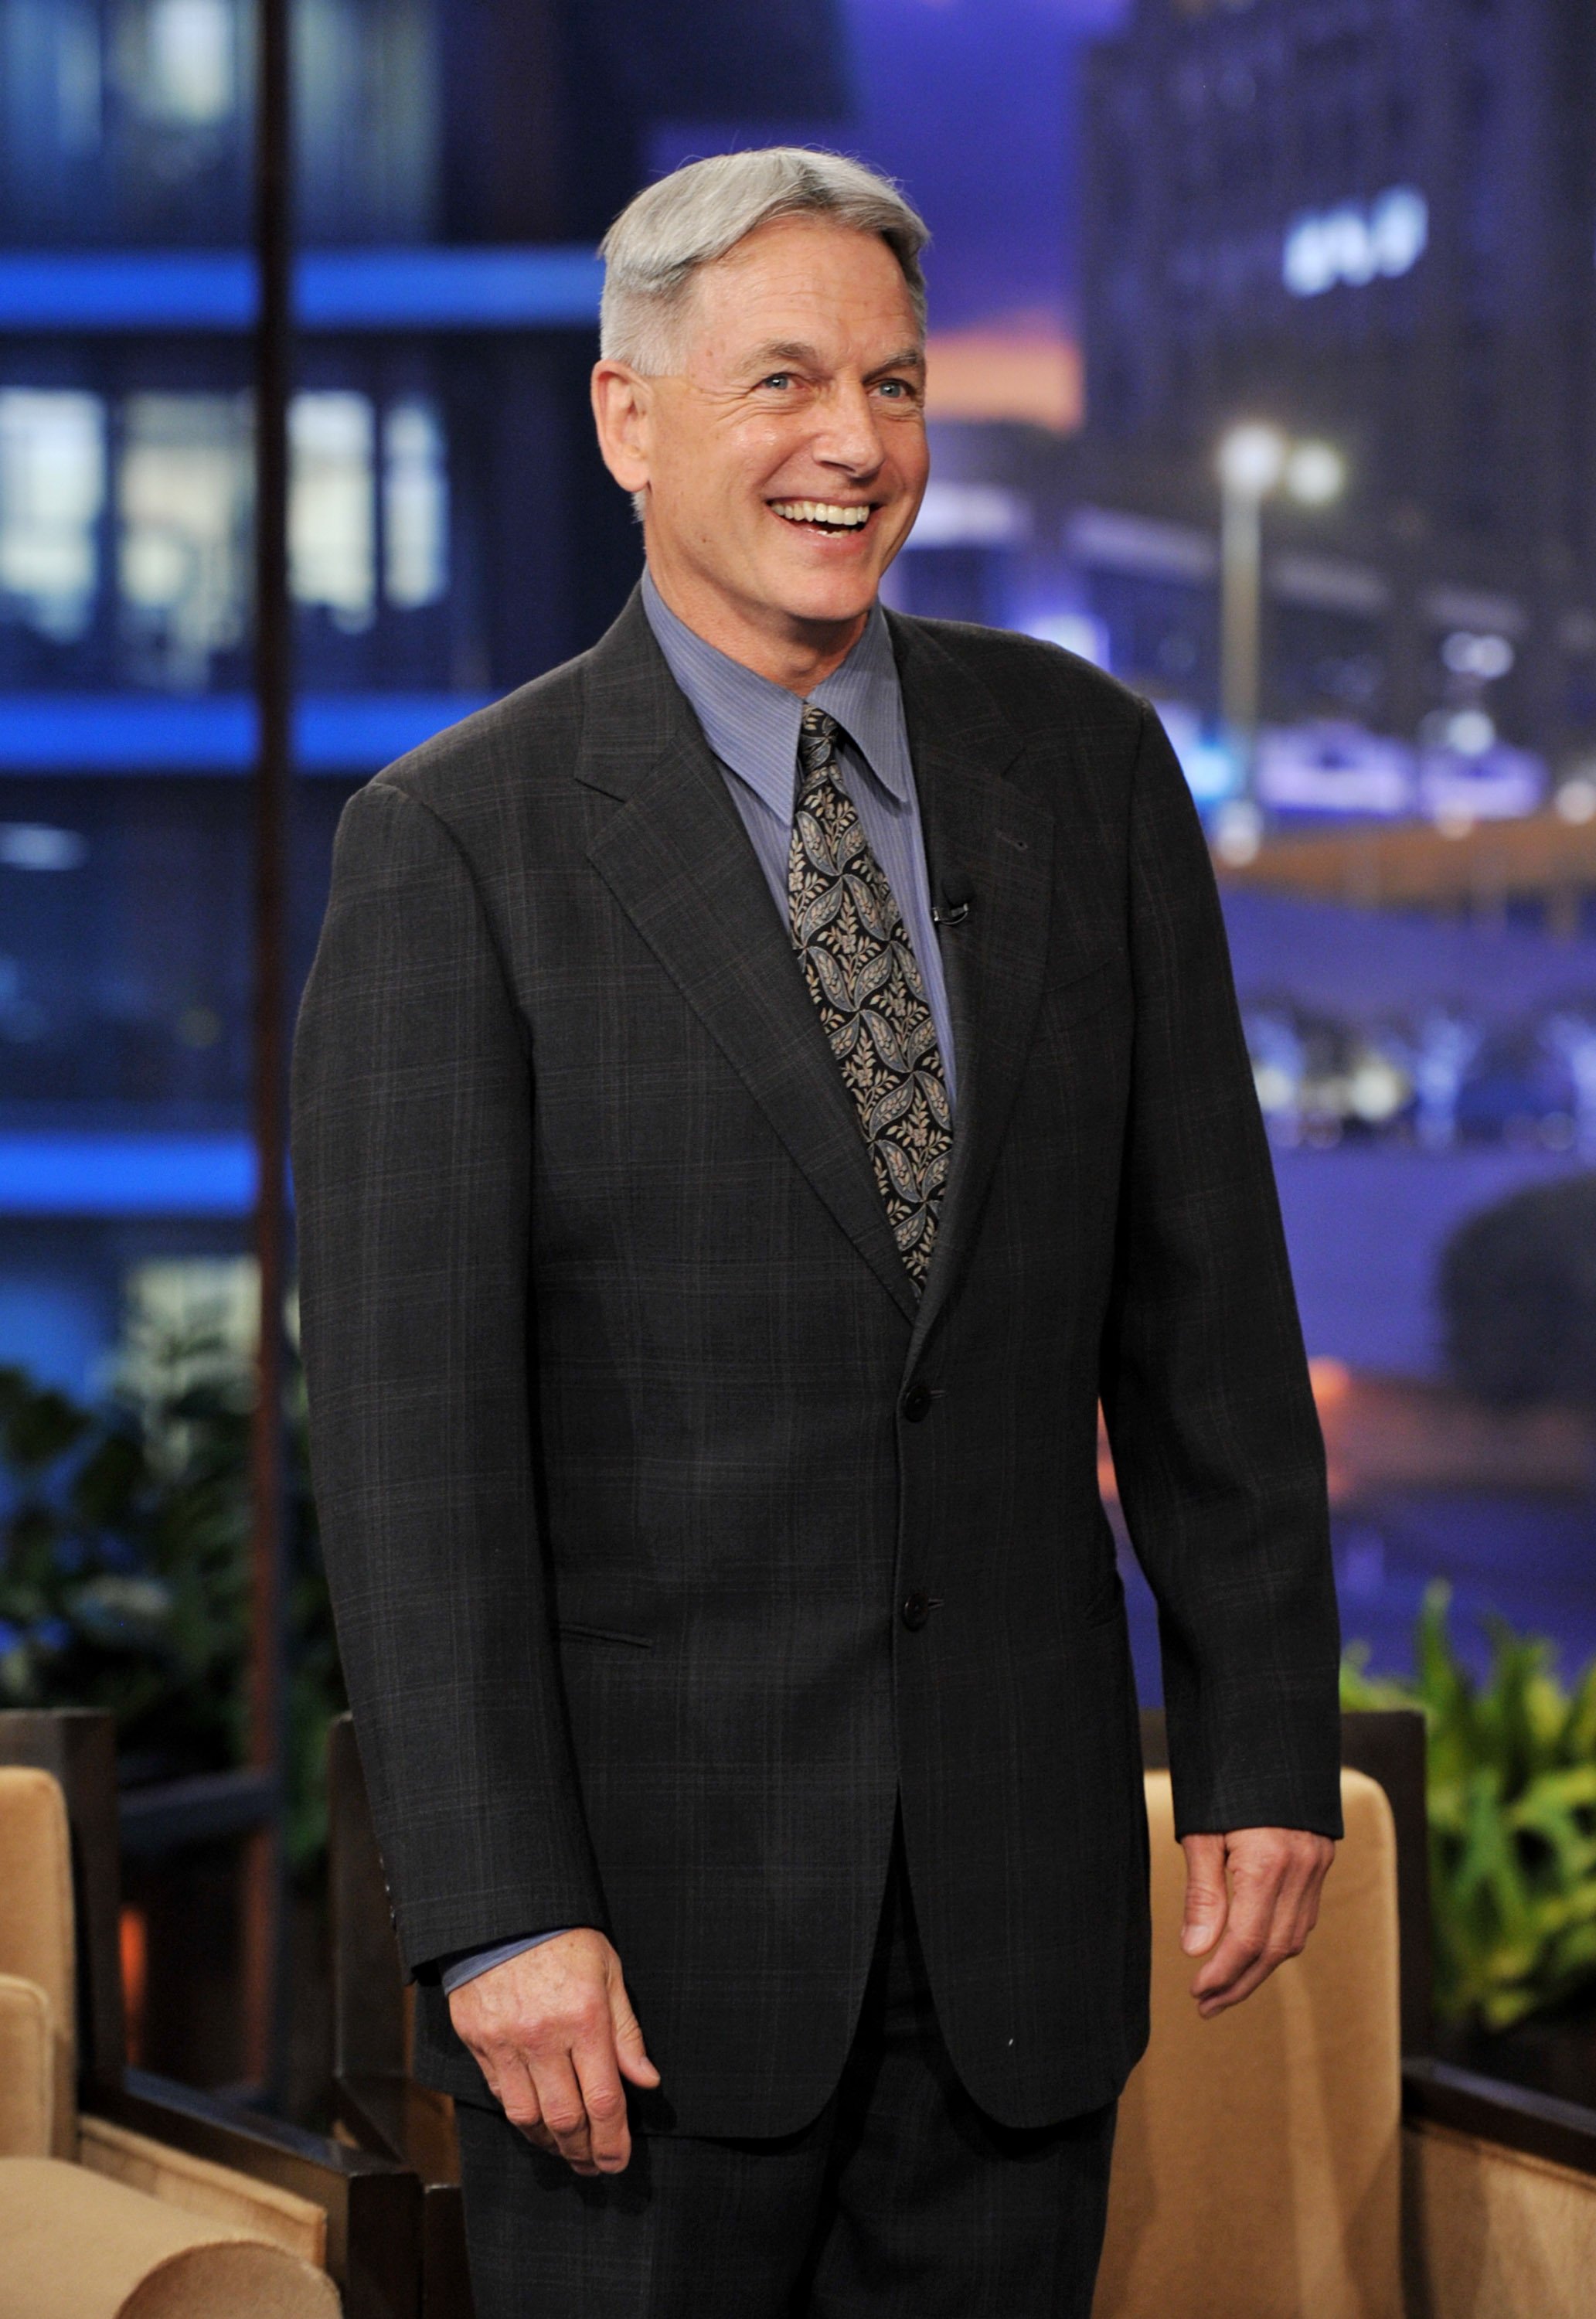 Mark Harmon in der "The Tonight Show With Jay Leno" in Burbank, Kalifornien, 31. Januar, 2012 | Quelle: Getty Images